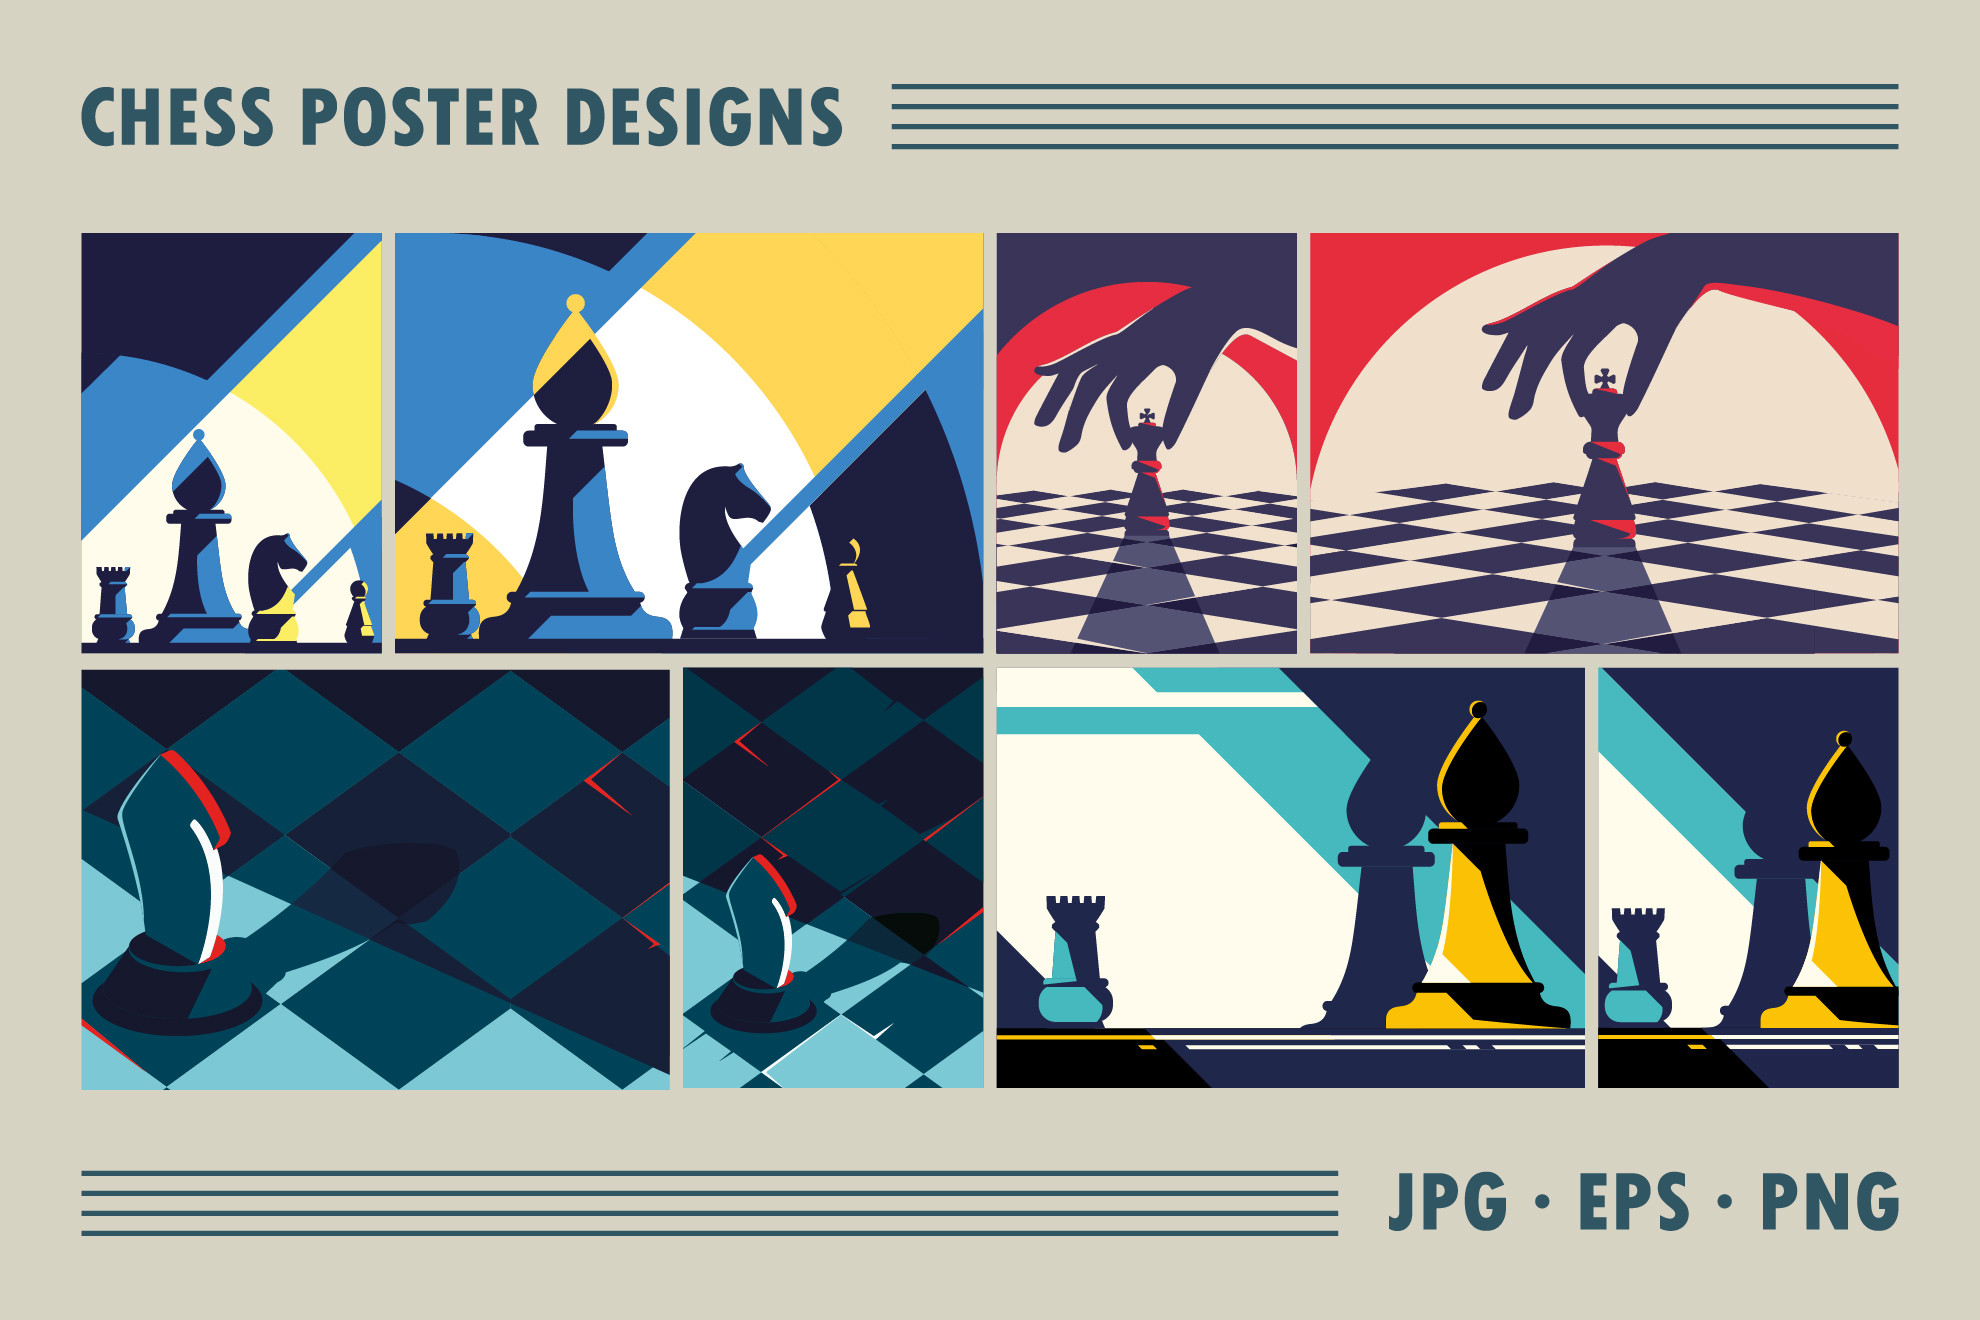 Chess Posterized Projects  Photos, videos, logos, illustrations